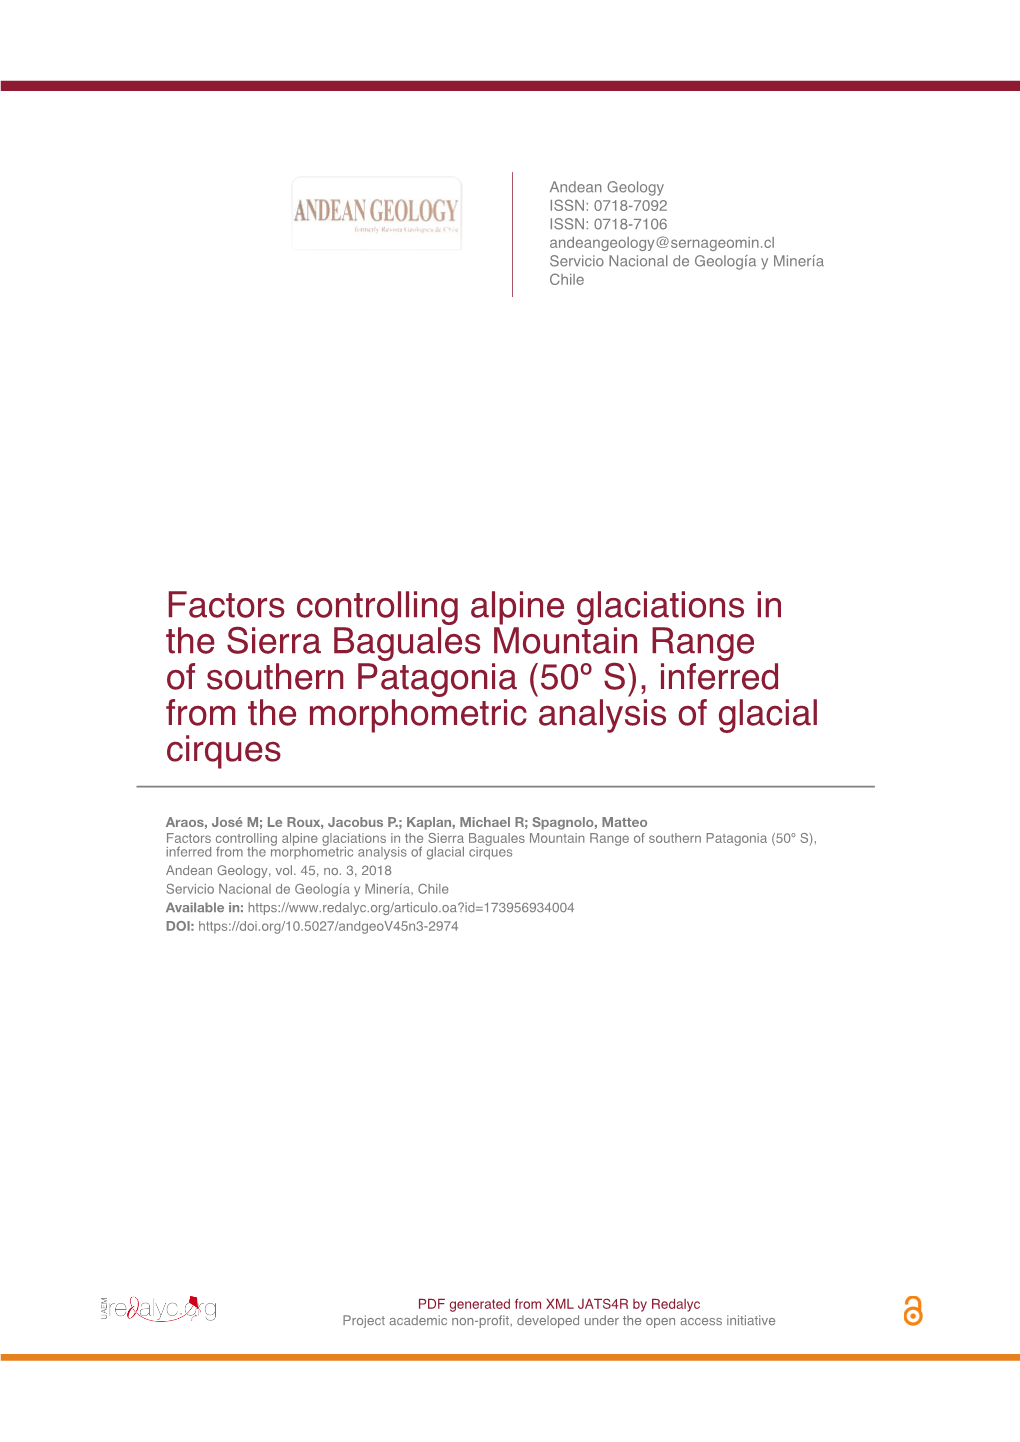 Factors Controlling Alpine Glaciations in the Sierra Baguales Mountain Range of Southern Patagonia (50º S), Inferred from the Morphometric Analysis of Glacial Cirques